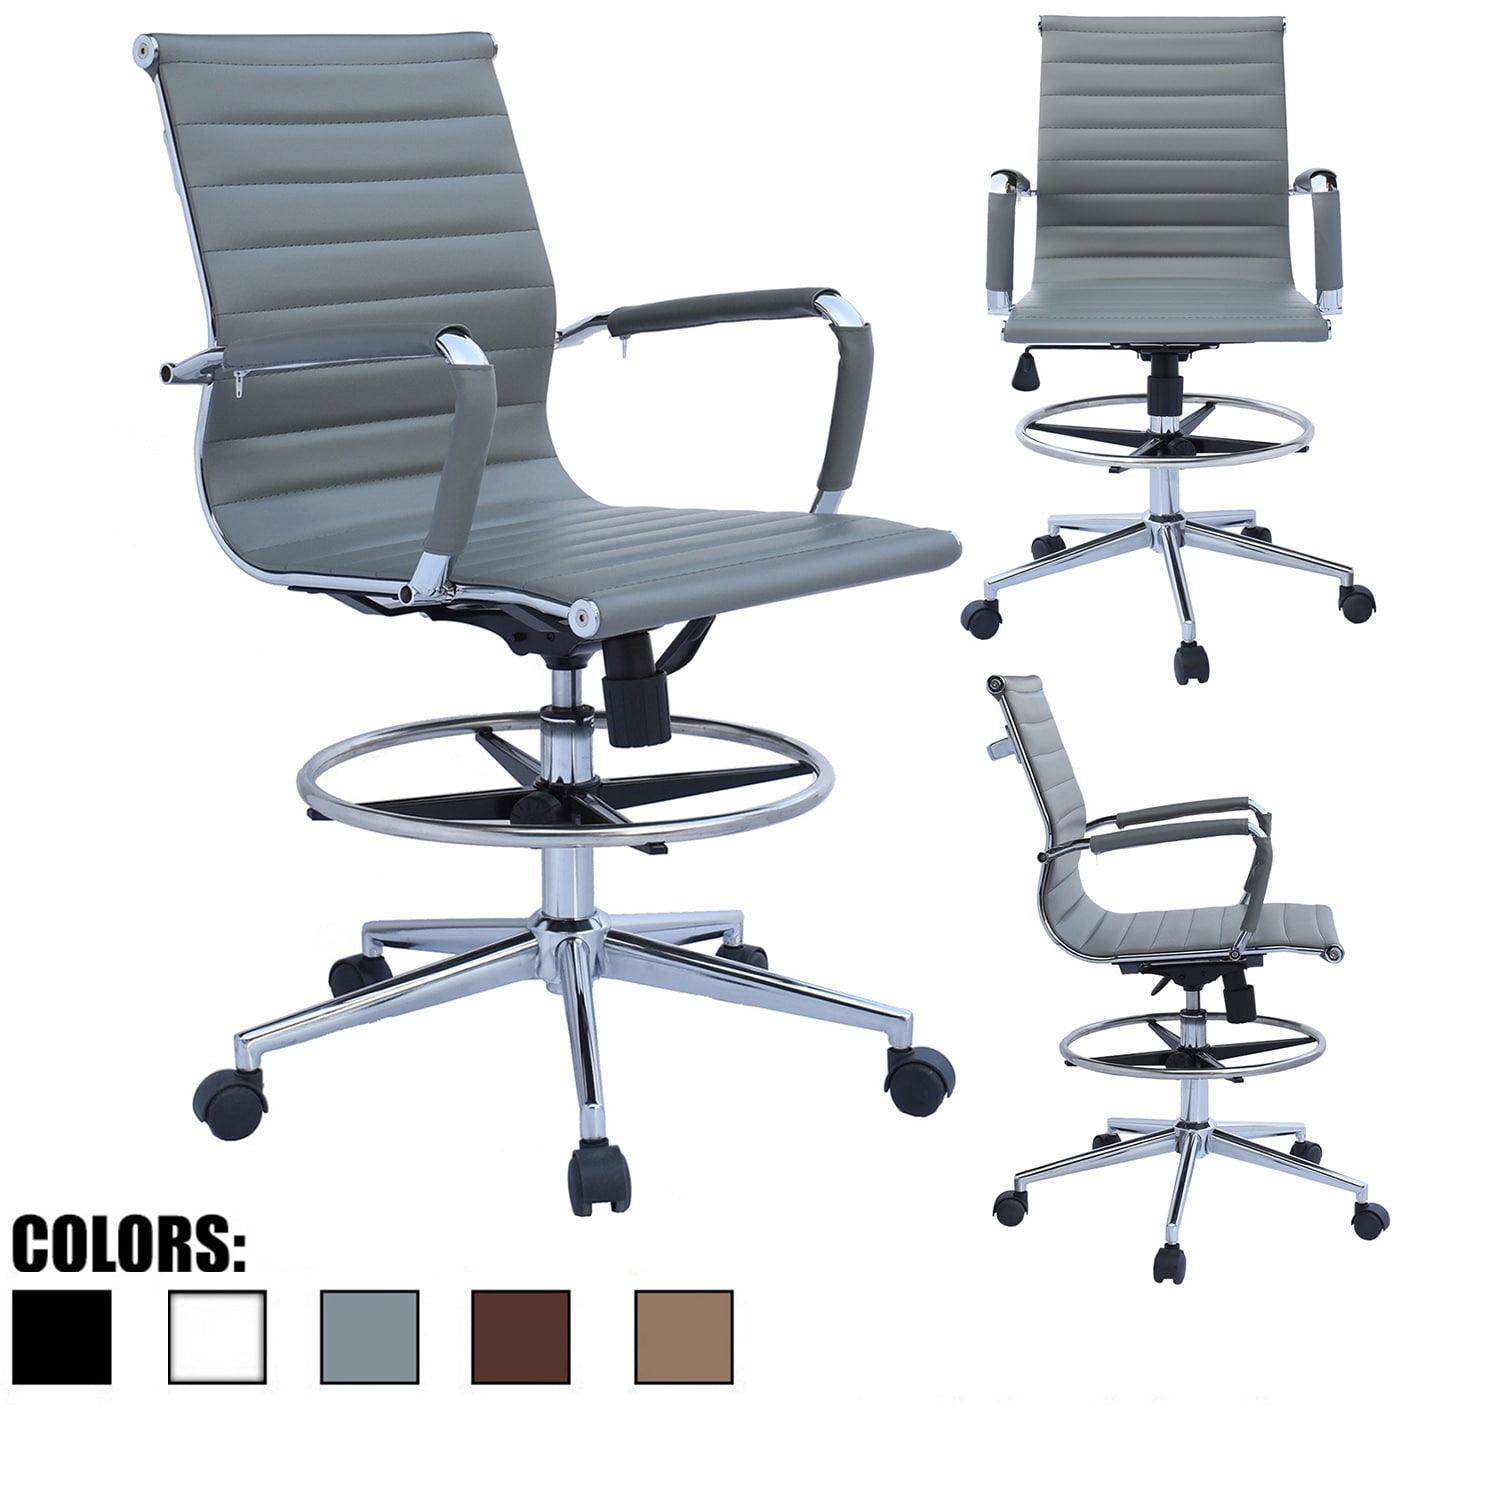 https://ak1.ostkcdn.com/images/products/is/images/direct/b5804d4567f0e55020253b96bda0957c68066278/2xhome-Drafting-Chair-With-Arms-For-Office-Ribbed-Counter-Height-Bar-Office-Wheels-Rest-Swivel-Work-Standing-Desk-Footrest.jpg